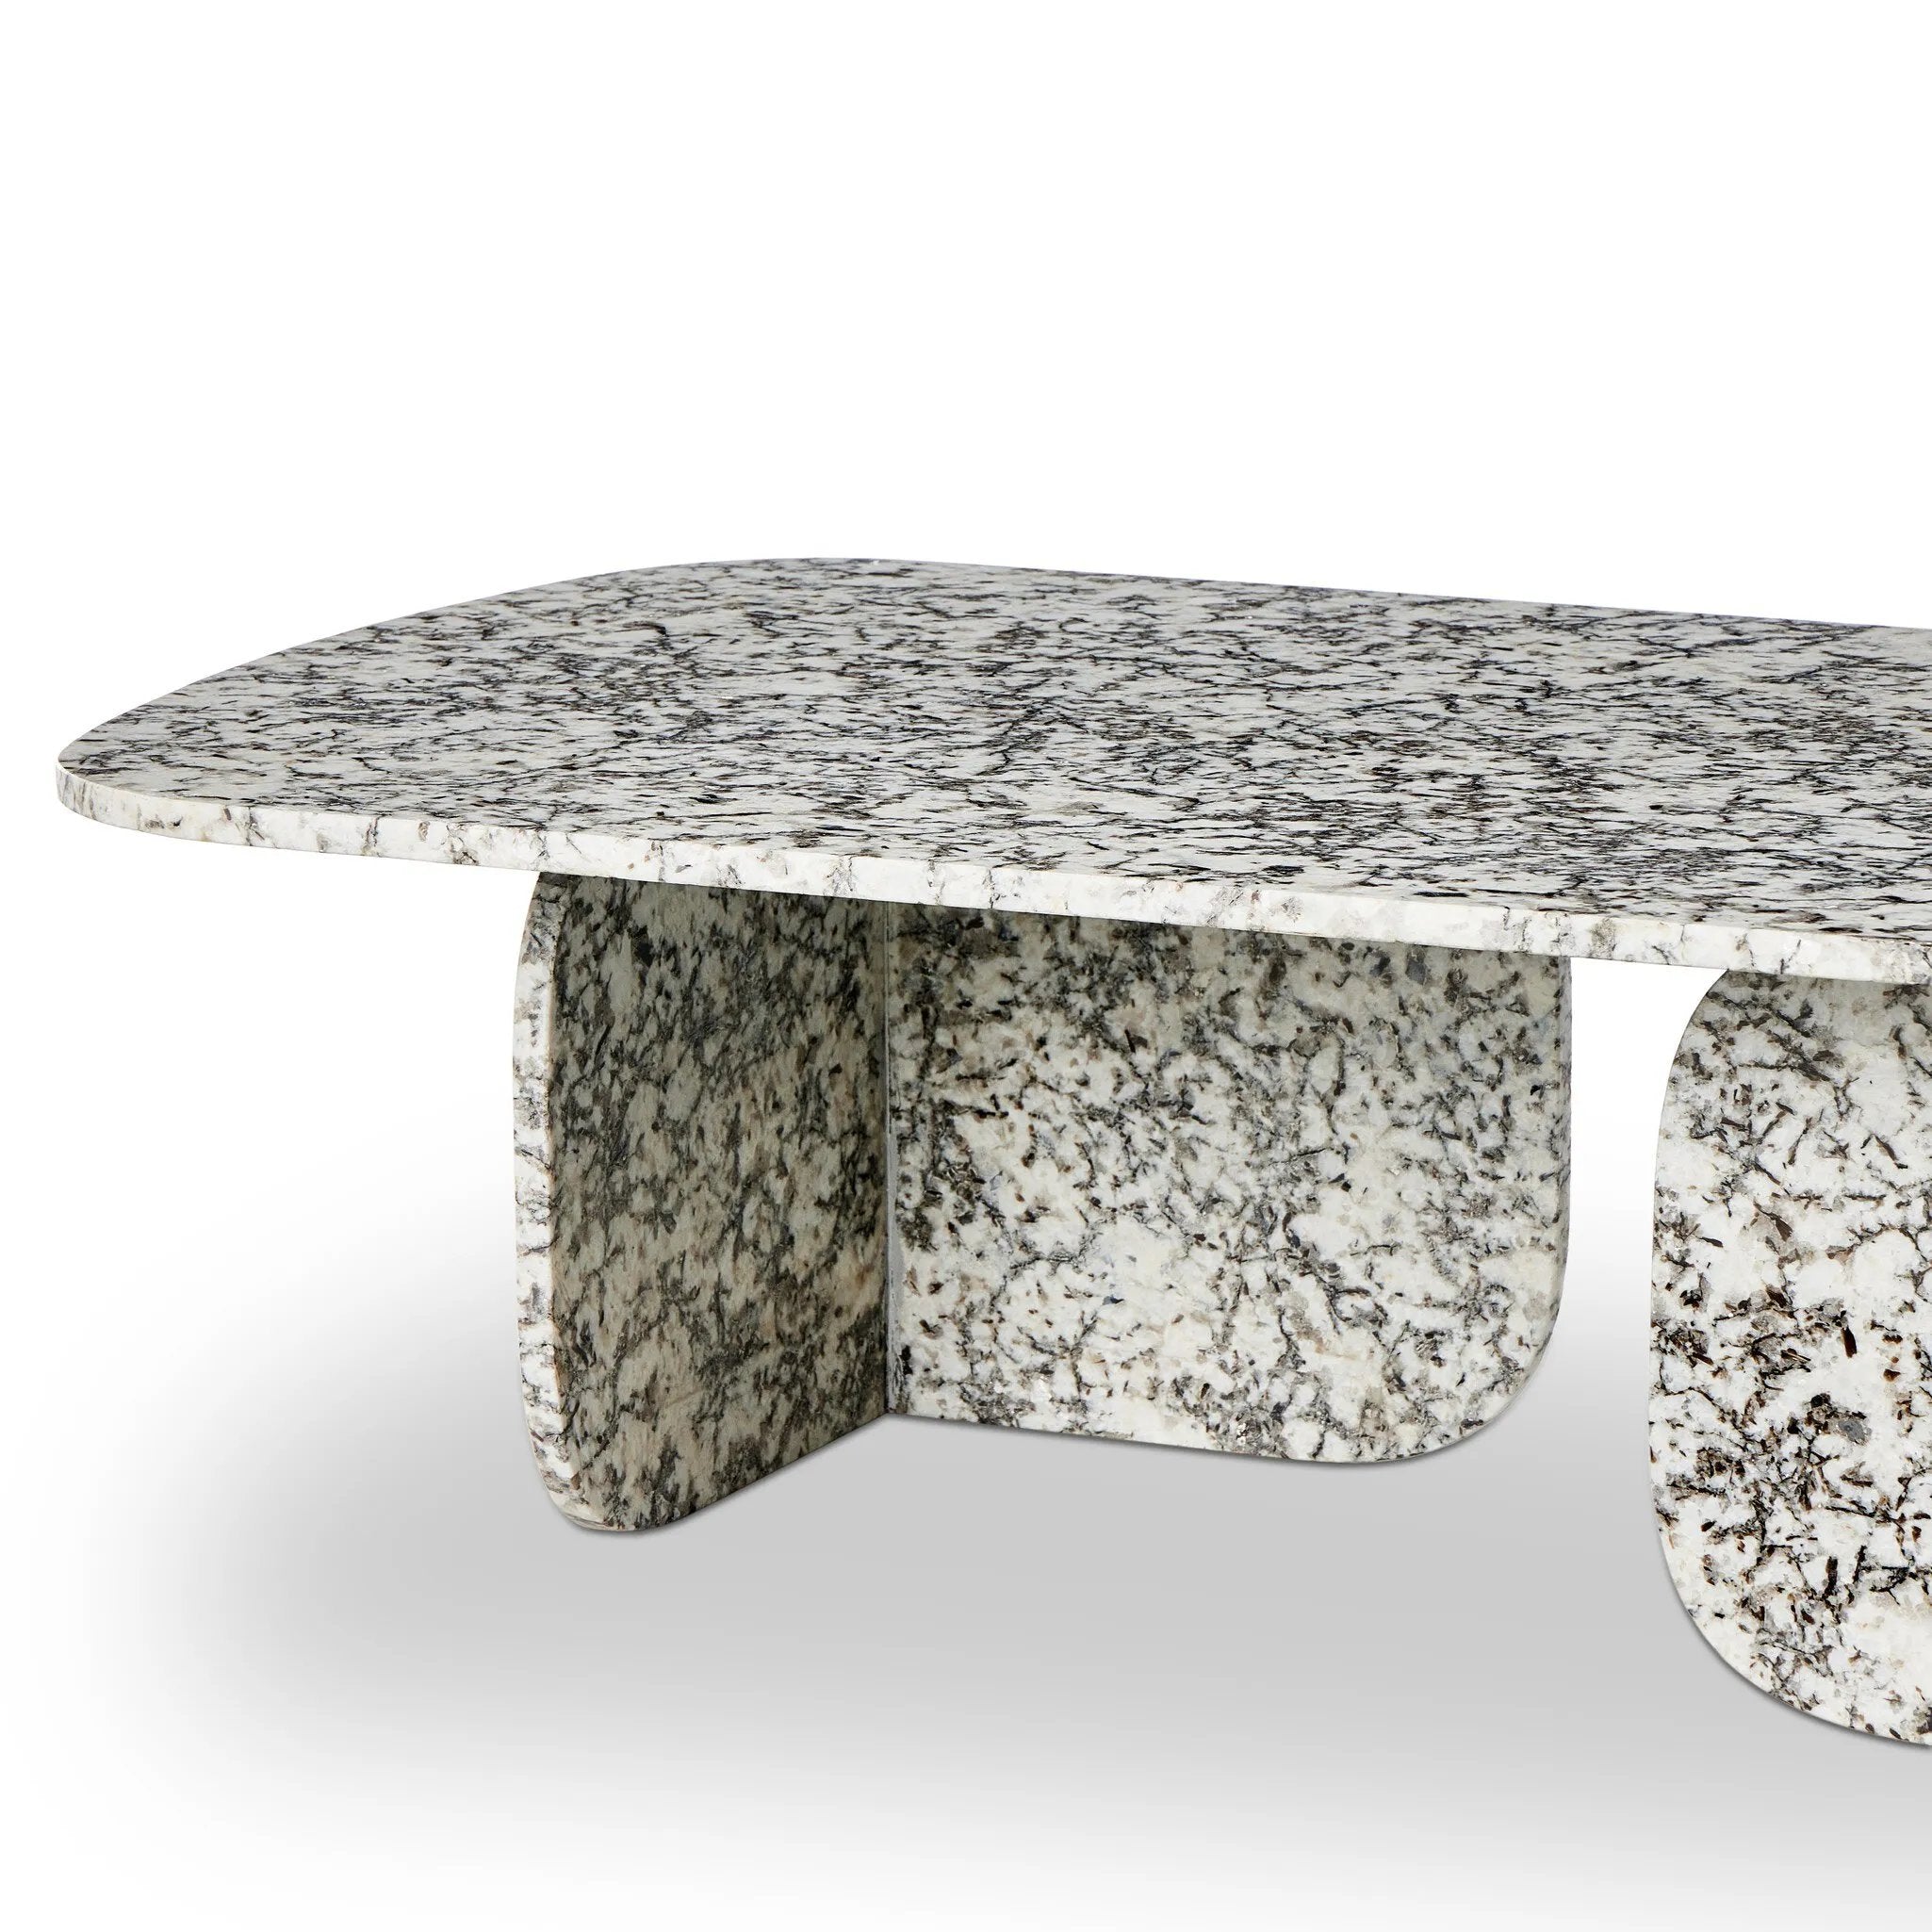 Speckled black marble shapes a unique coffee table with softened corners and subtle Eighties vibes.Collection: Marlo Amethyst Home provides interior design, new home construction design consulting, vintage area rugs, and lighting in the Laguna Beach metro area.